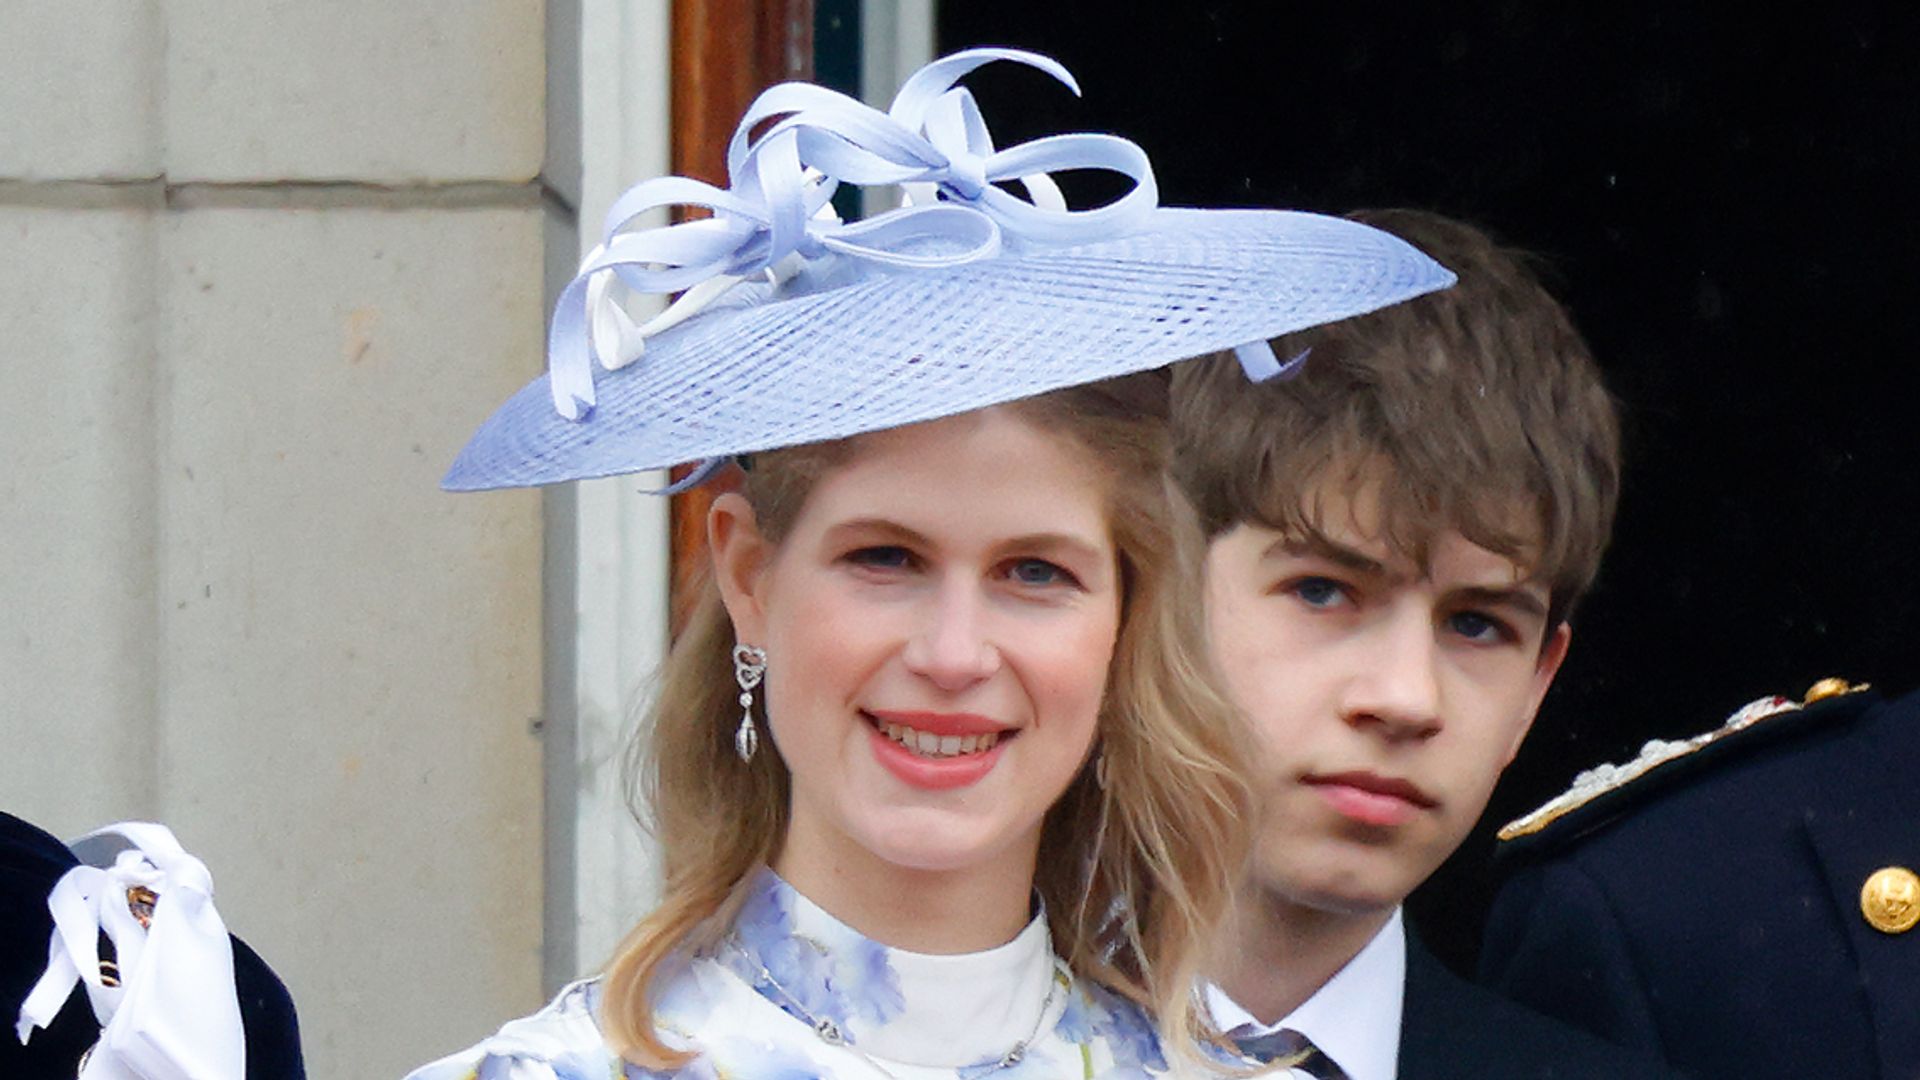 Lady Louise Windsor reunites with royal family at coronation after